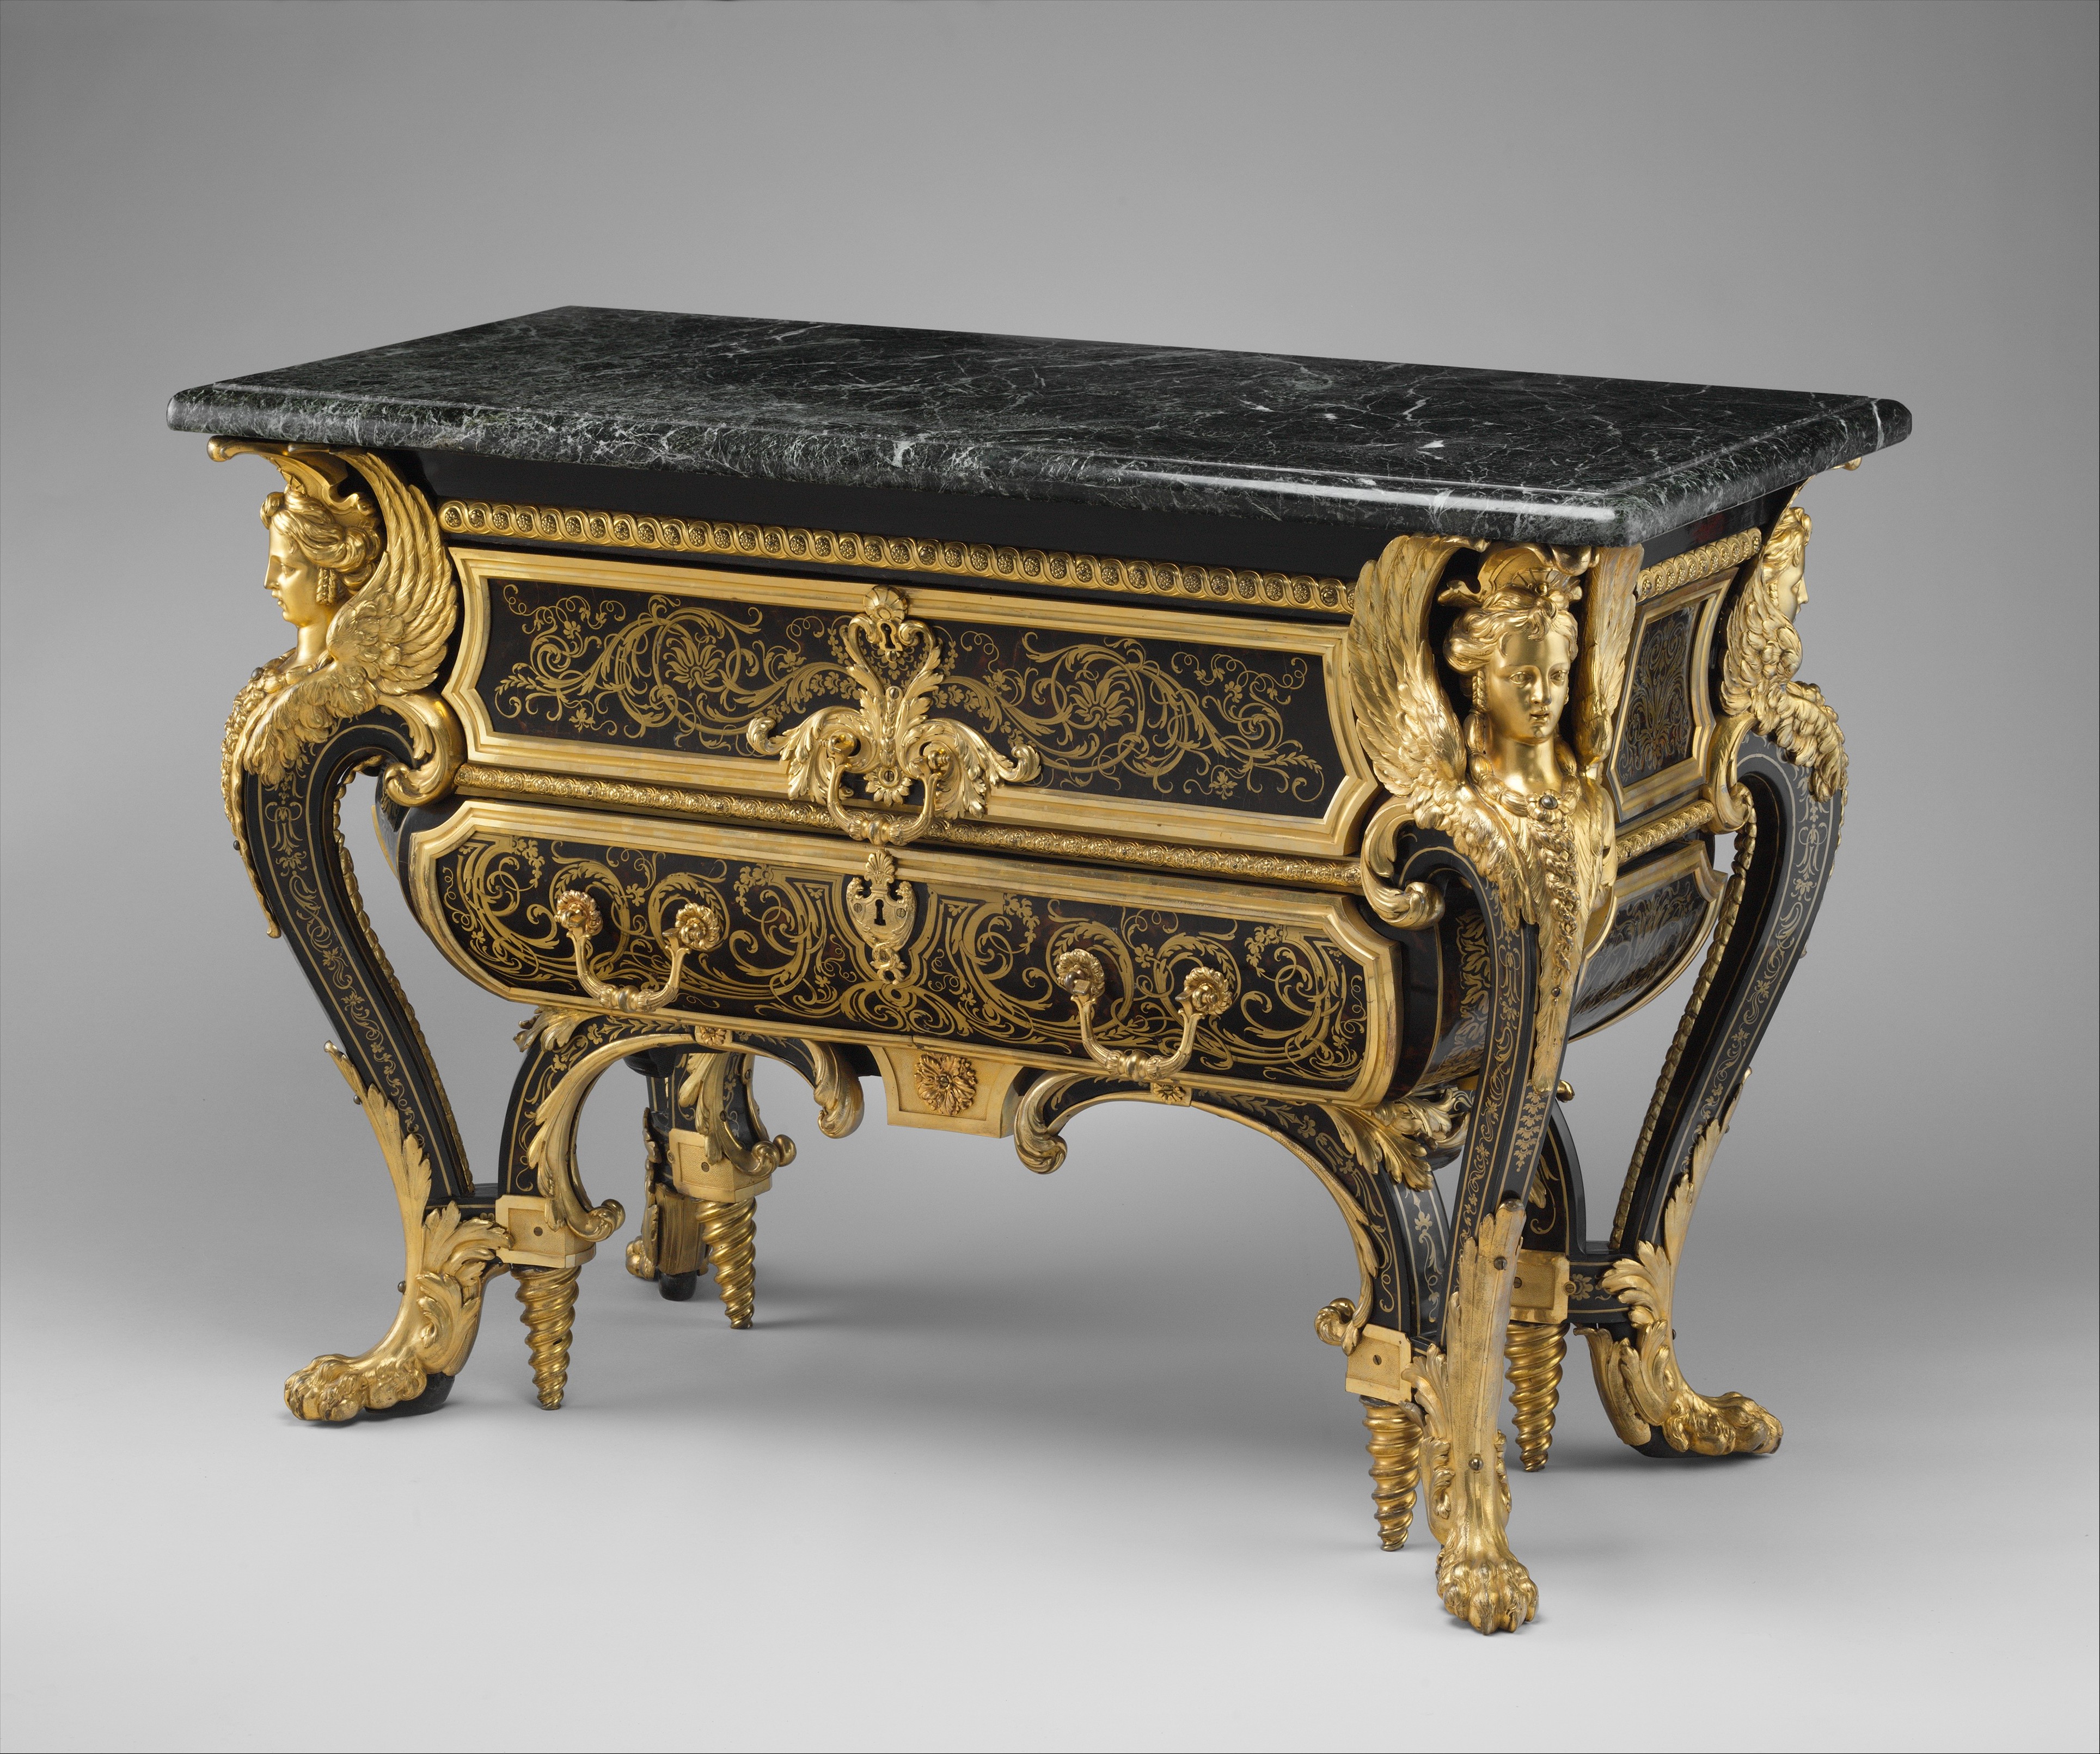 André Charles Boulle | Commode | French | The Metropolitan Museum of Art